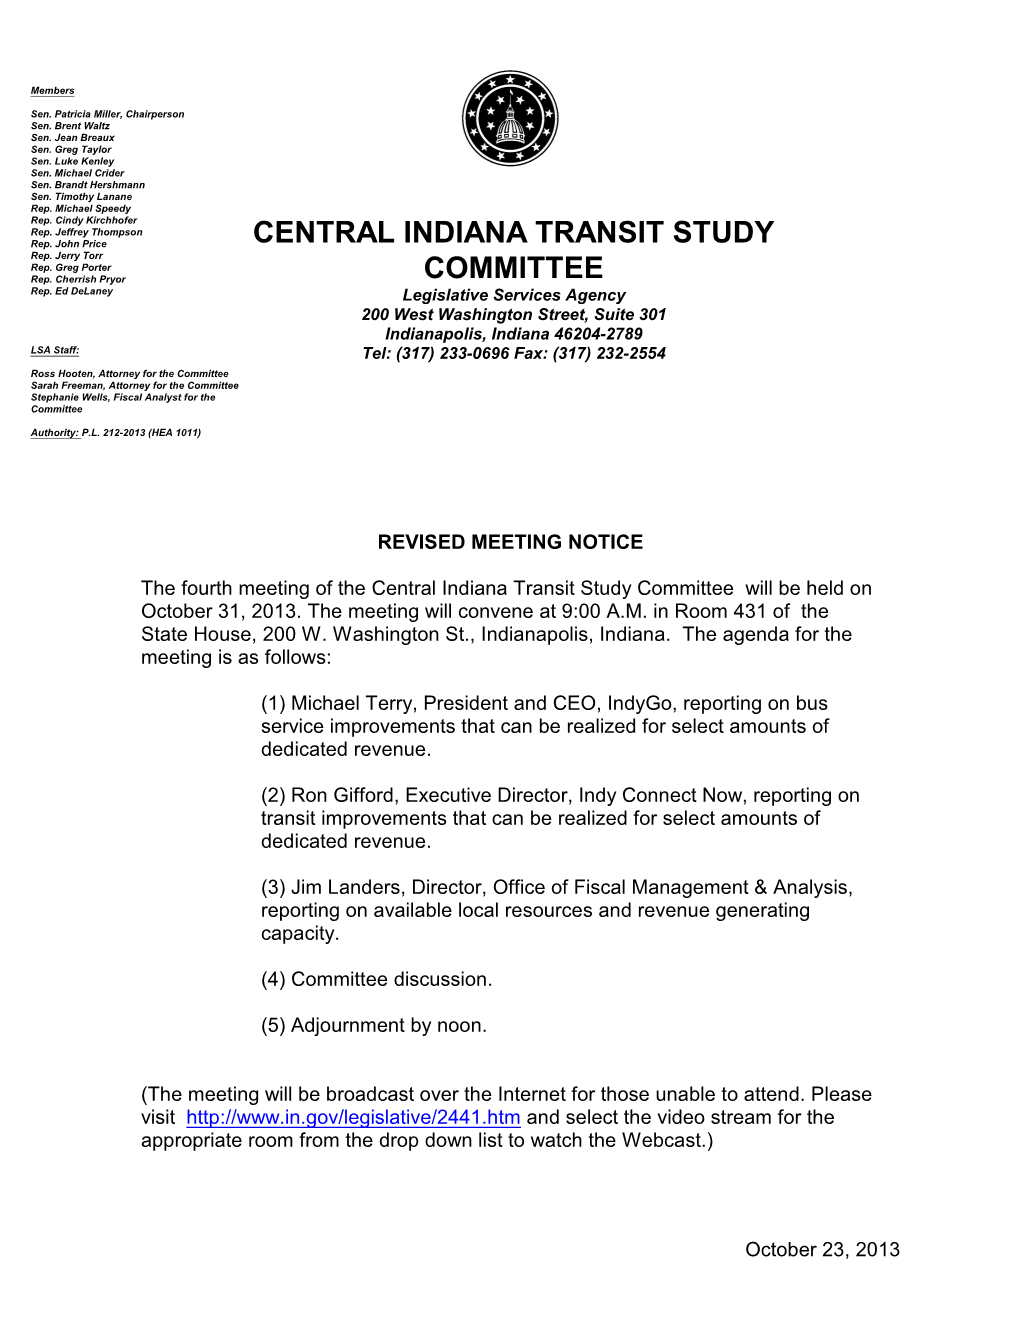 NT 10/31/2013 Central Indiana Transit Study Committee